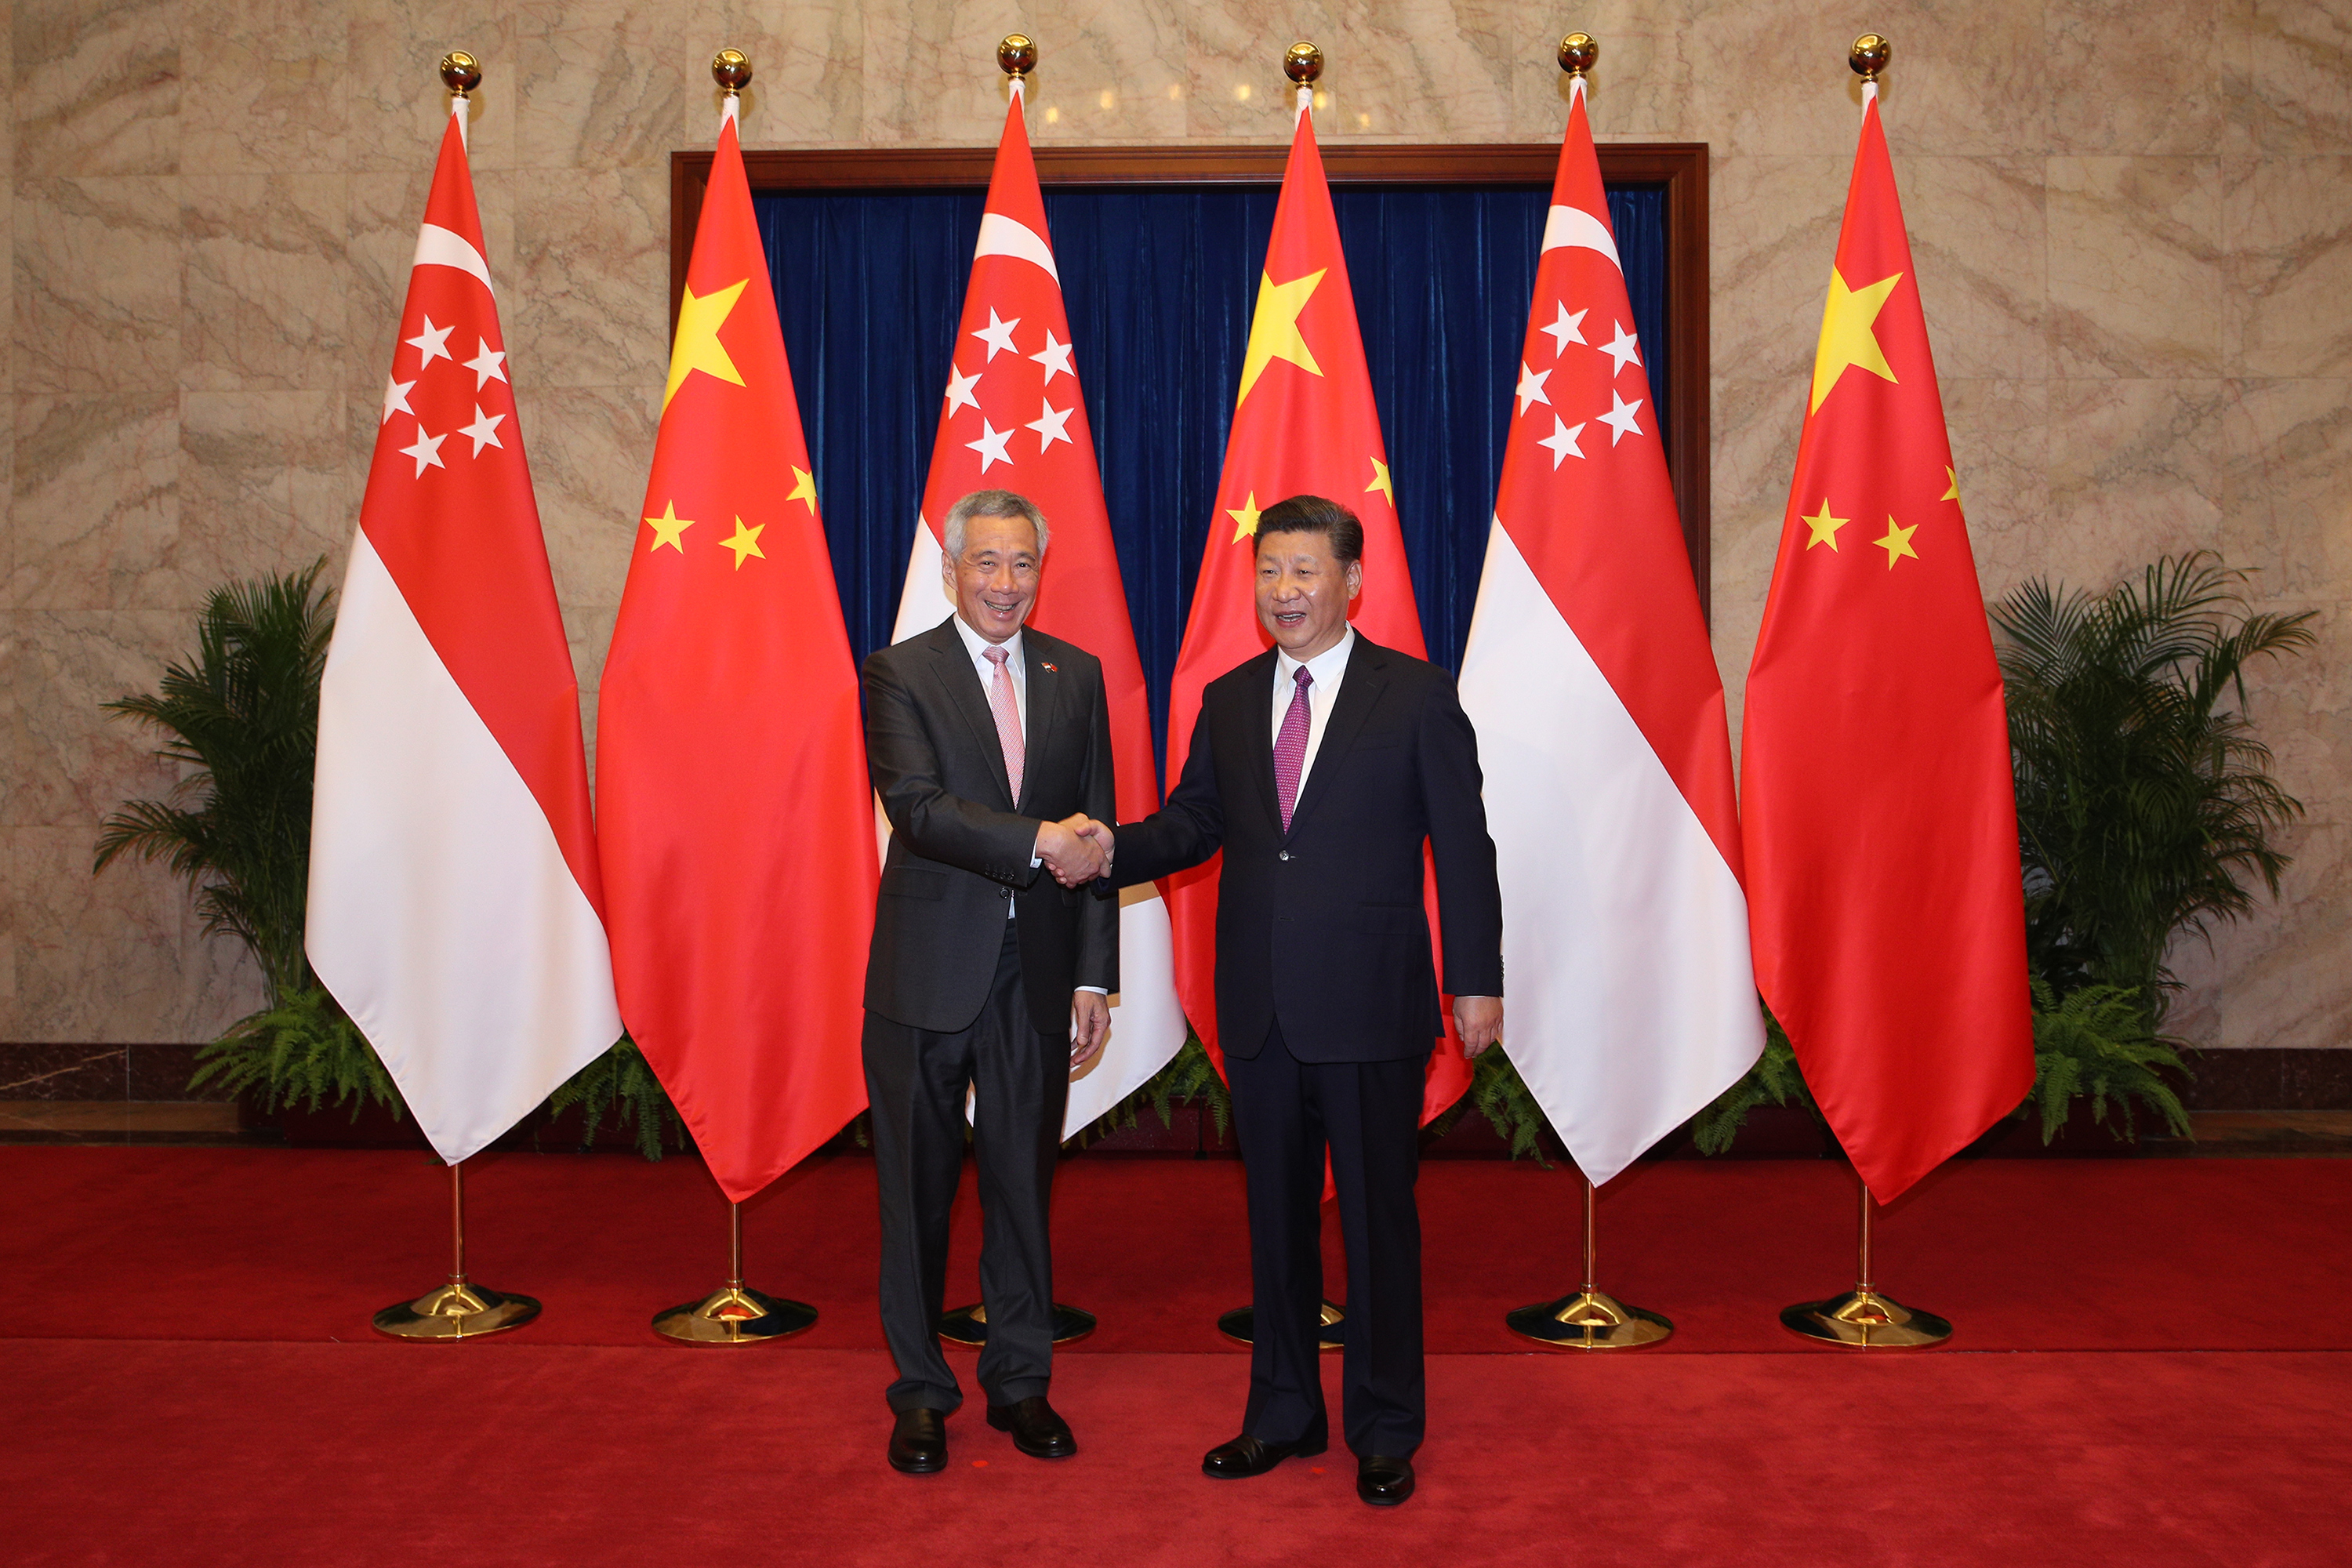 PM Lee Hsien Loong meeting Chinese President Xi Jinping on 20 Sep 2017 (MCI Photo by Chwee)